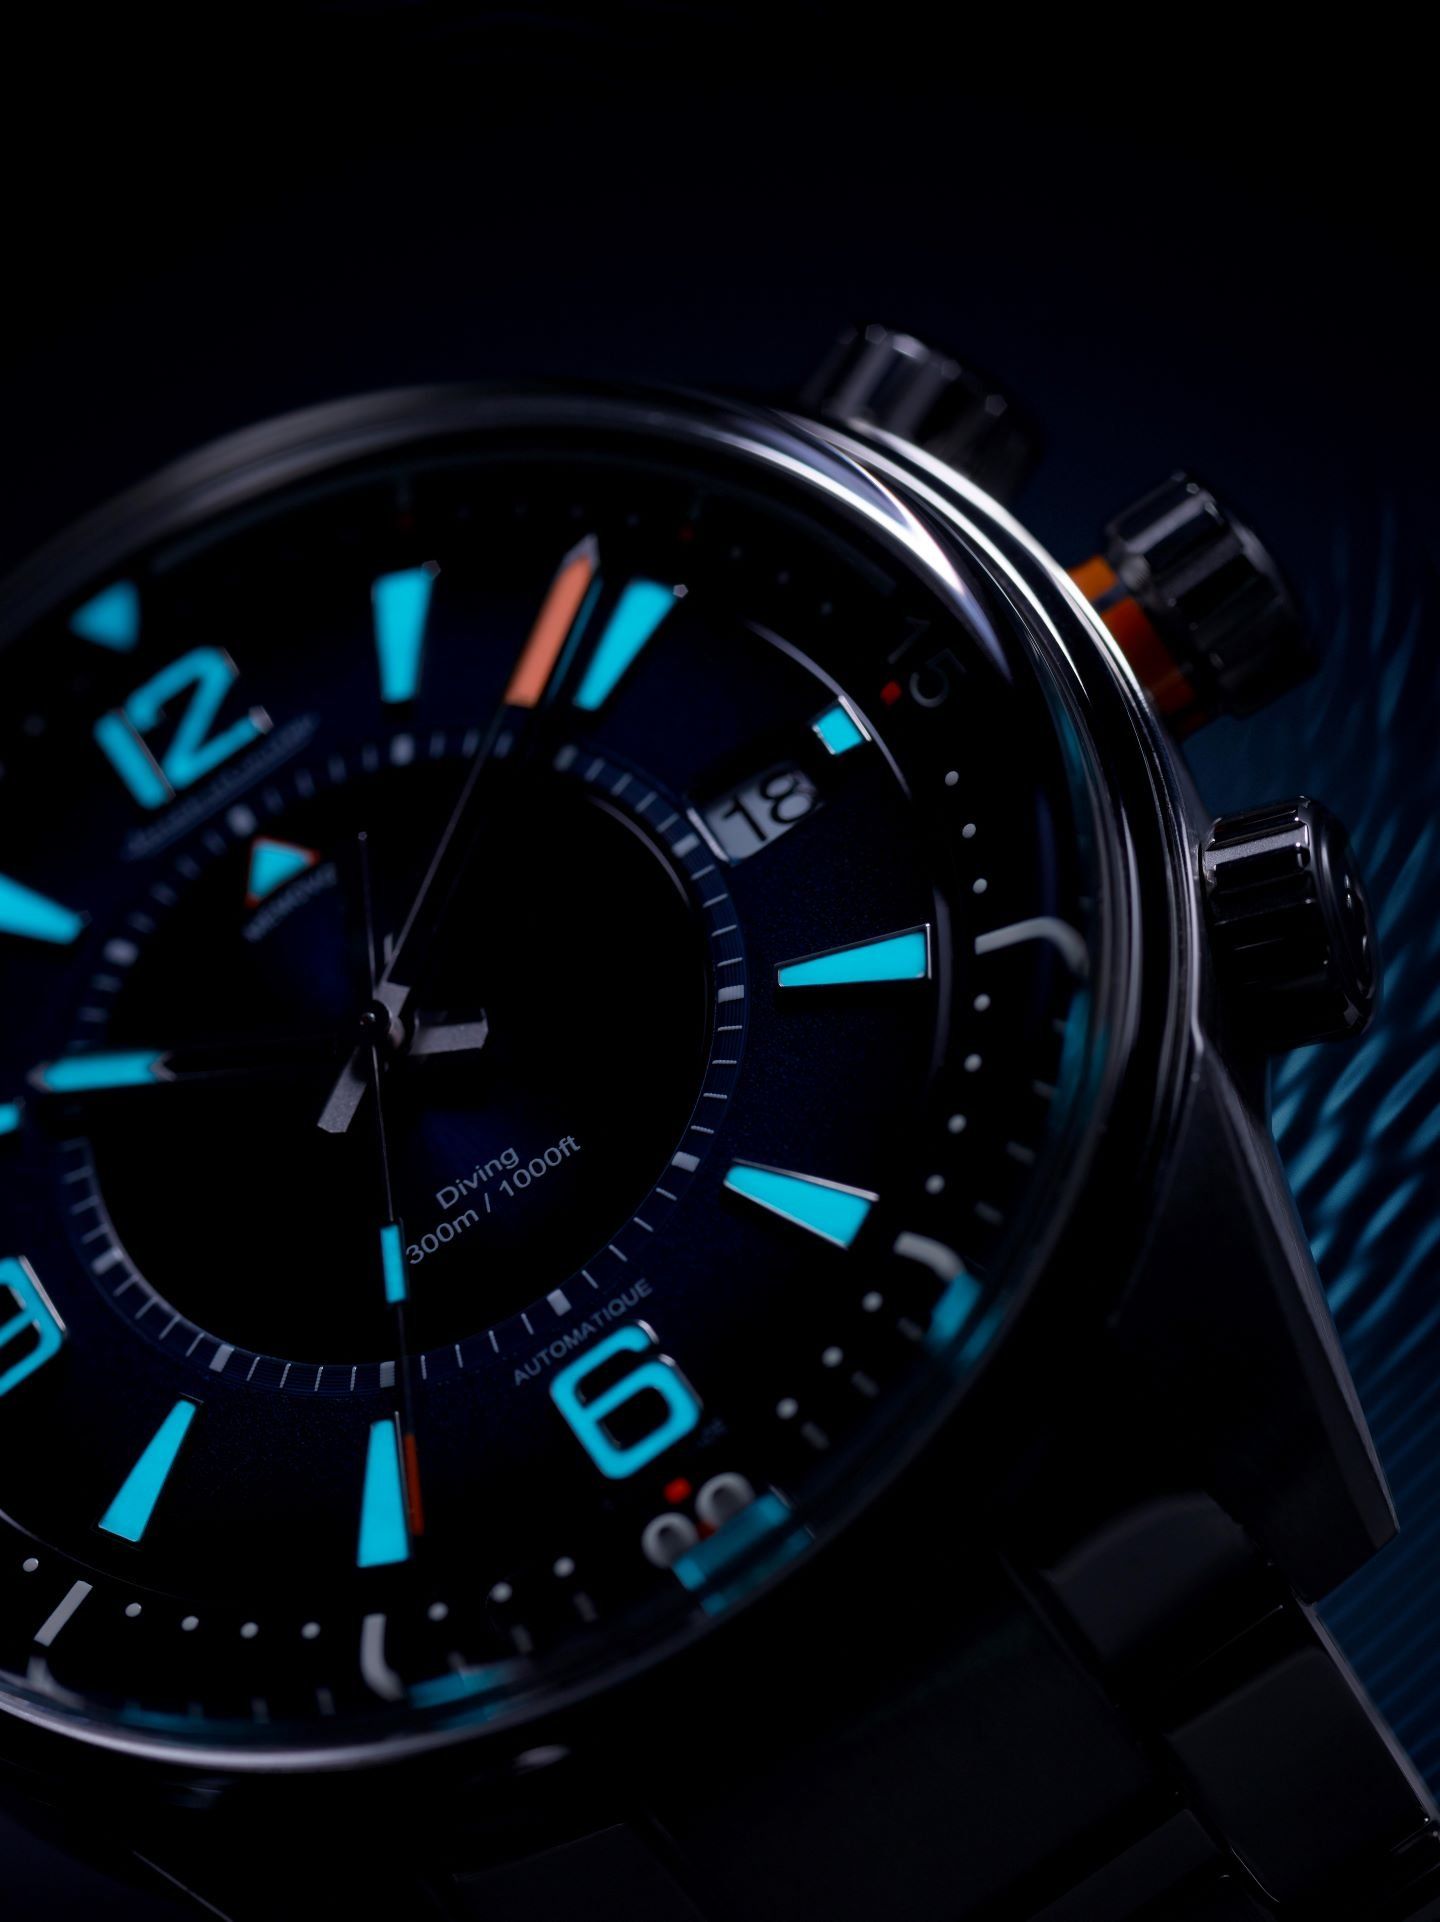 A detailed look of the Jaeger-LeCoultre Polaris